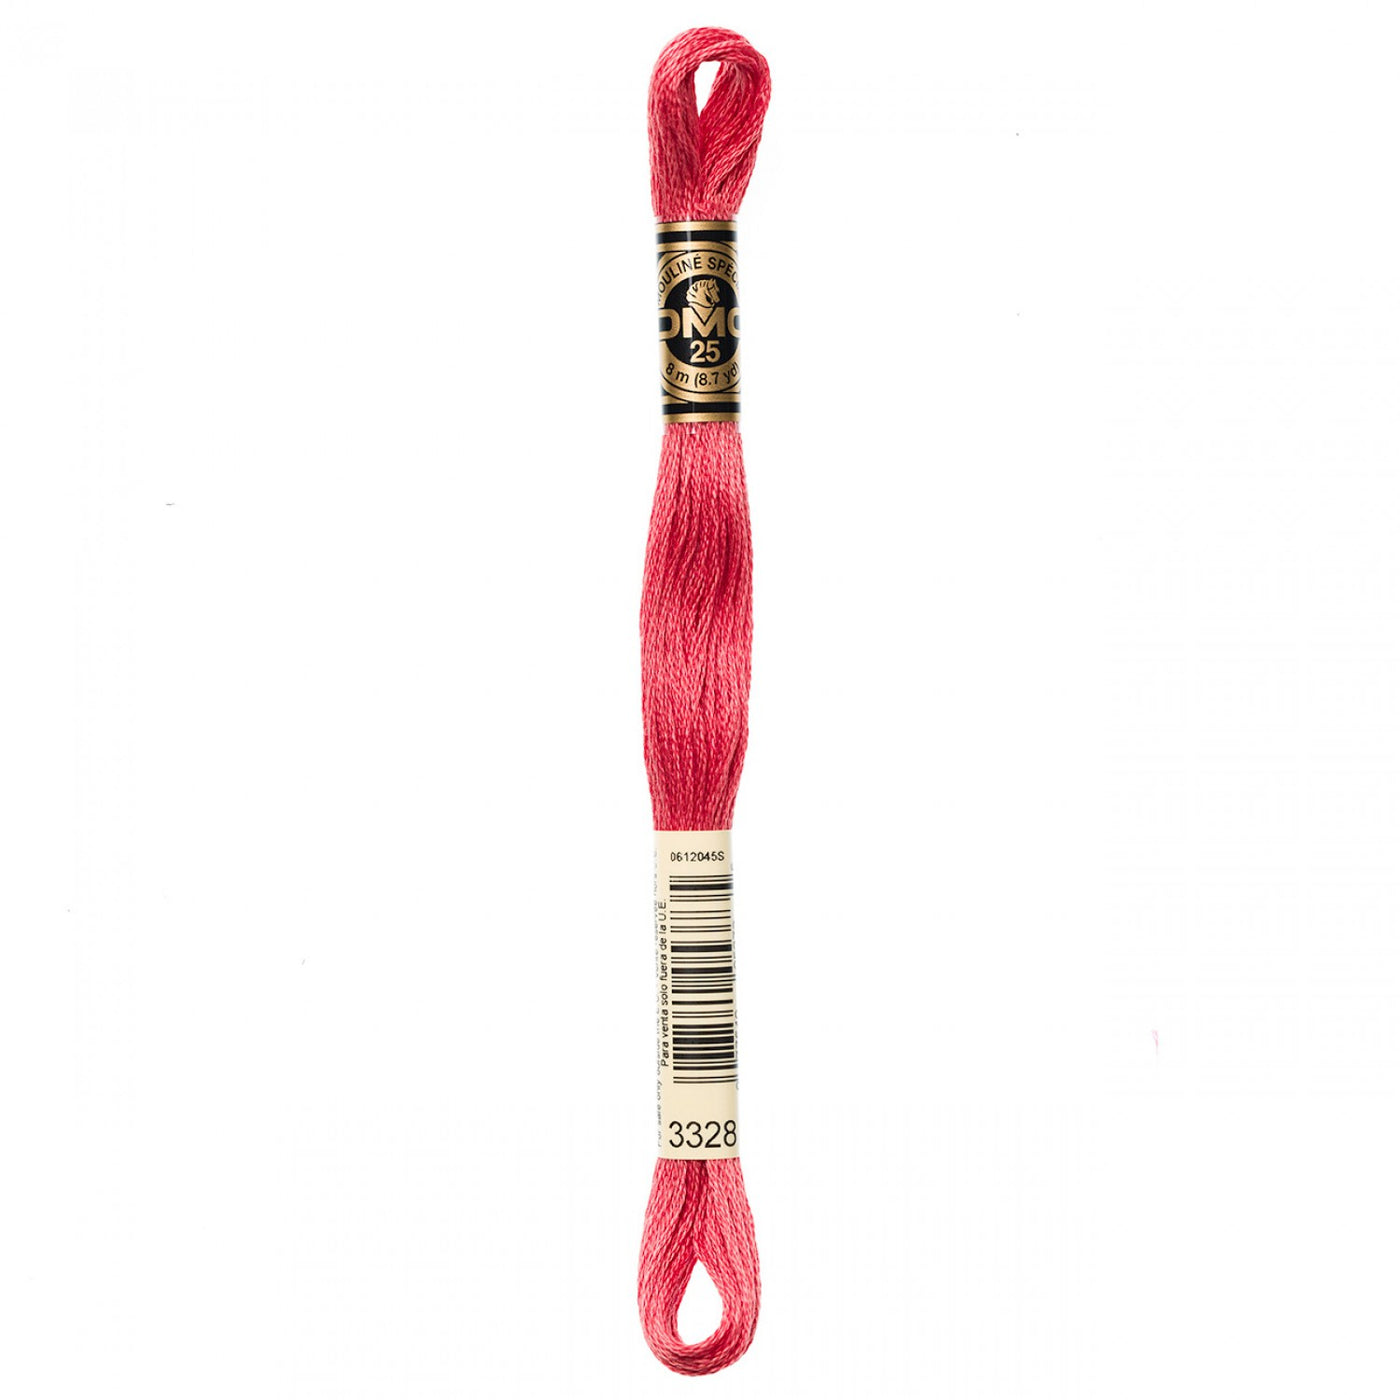 6-Strand Embroidery Floss 3328 Dk Salmon